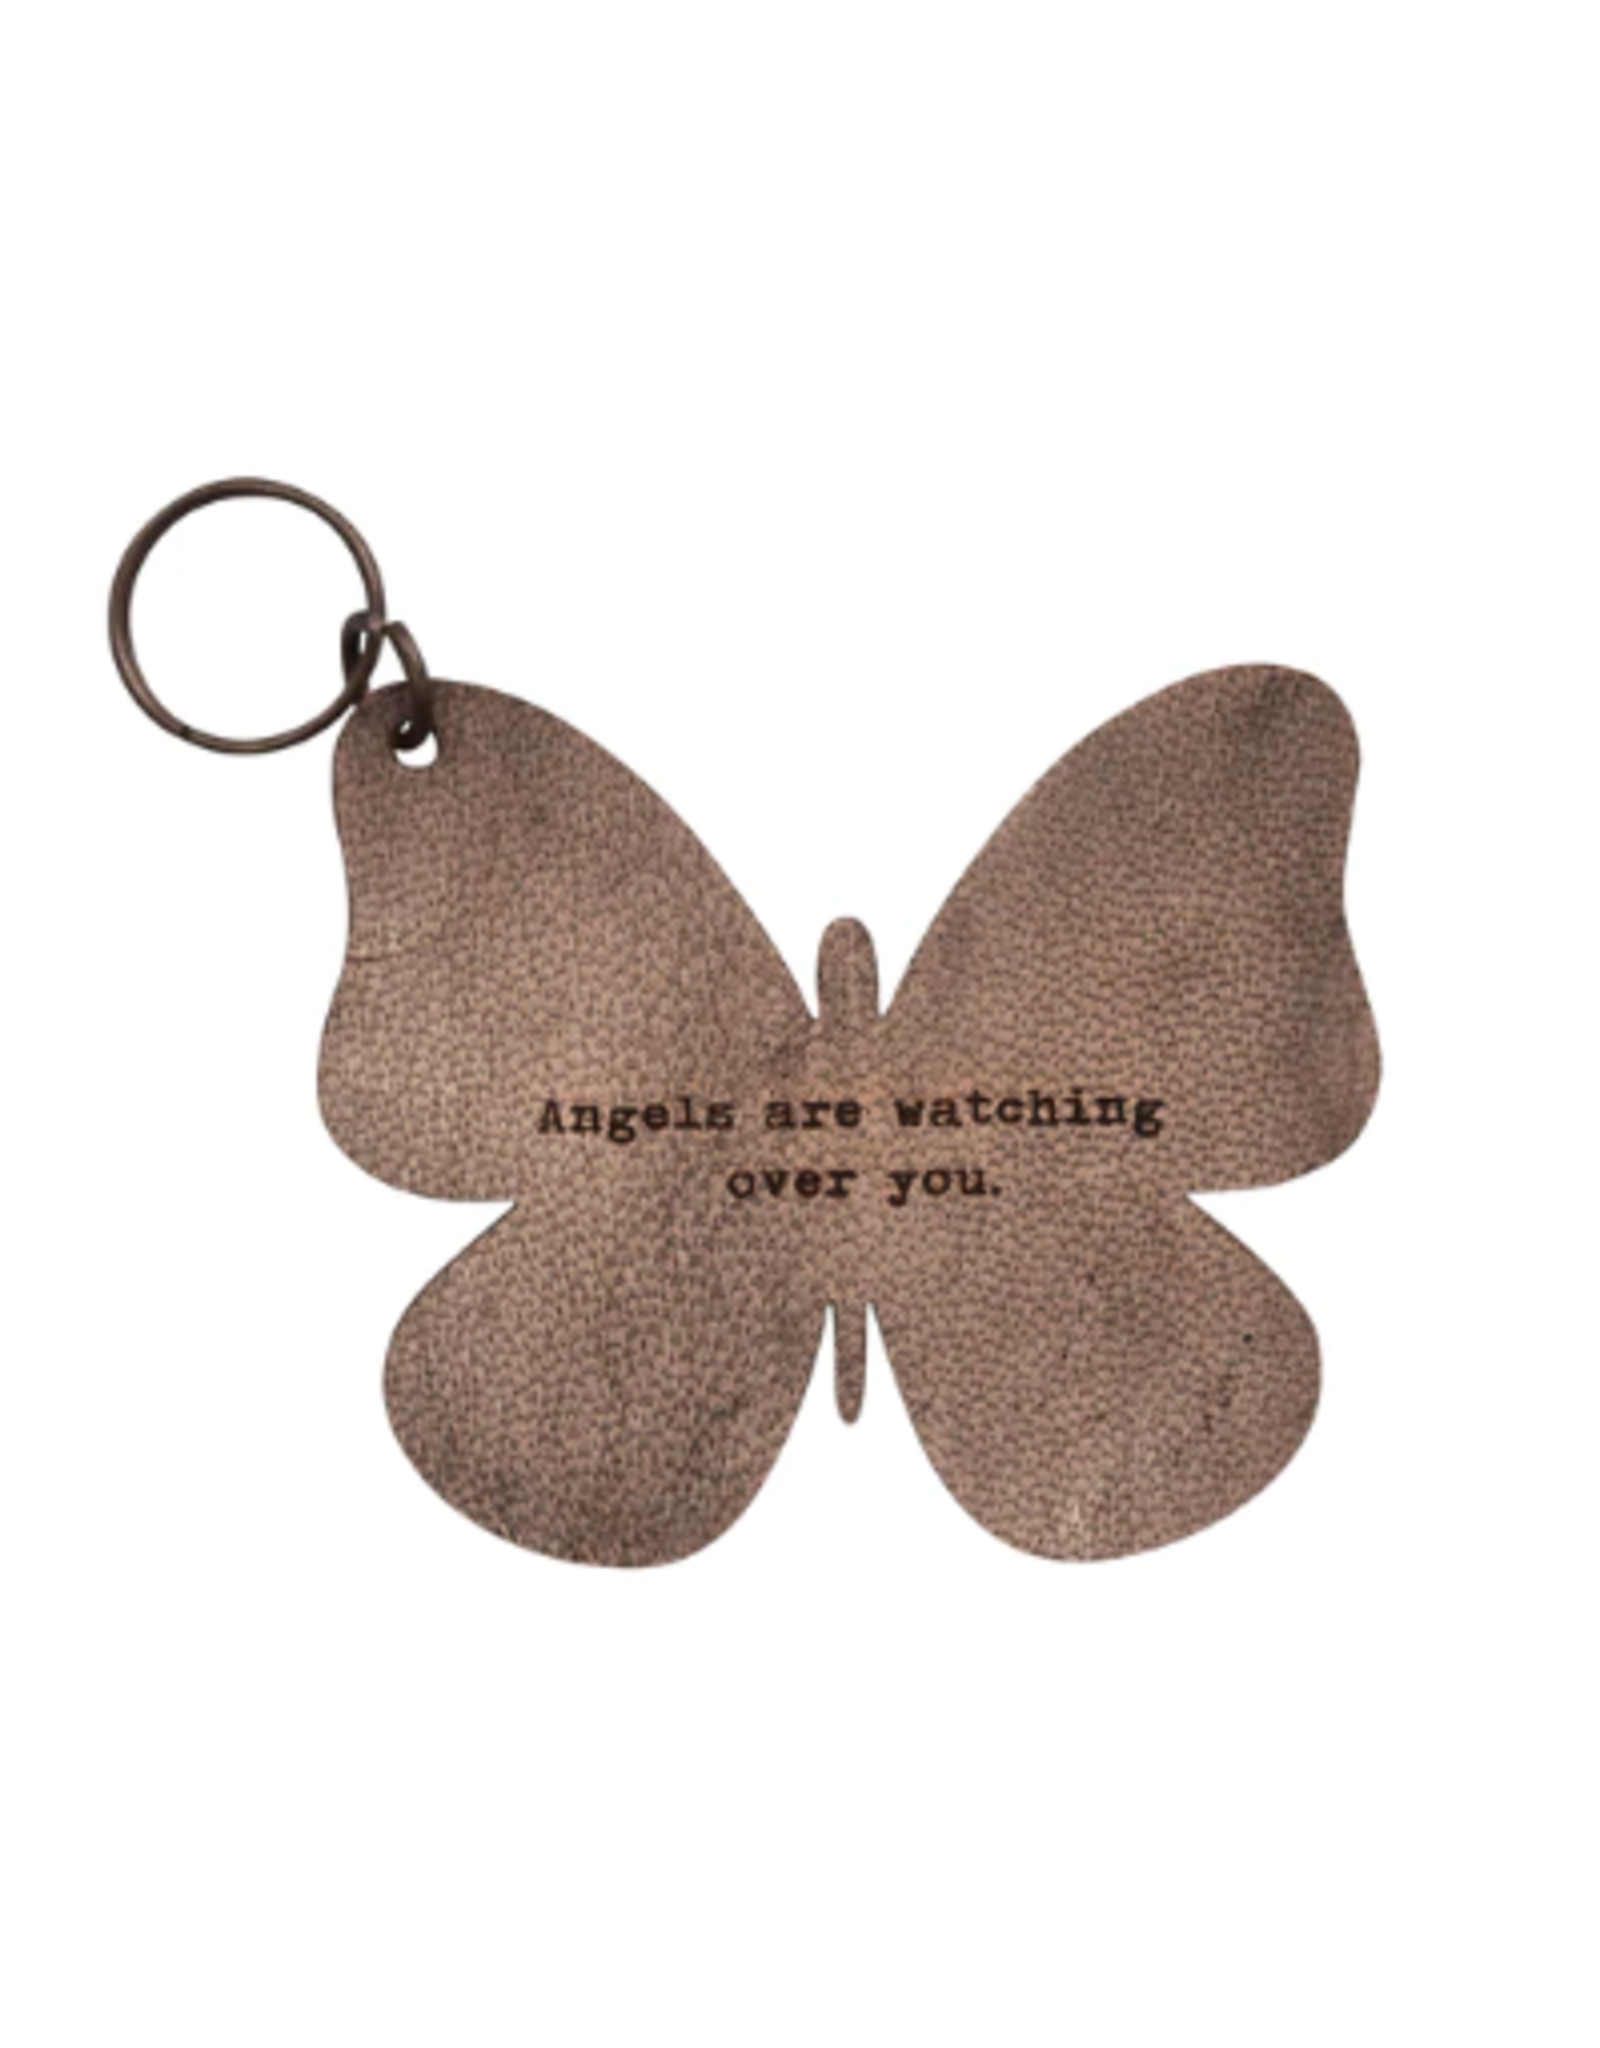 Sugarboo & Co Leather Butterfly Keychain,